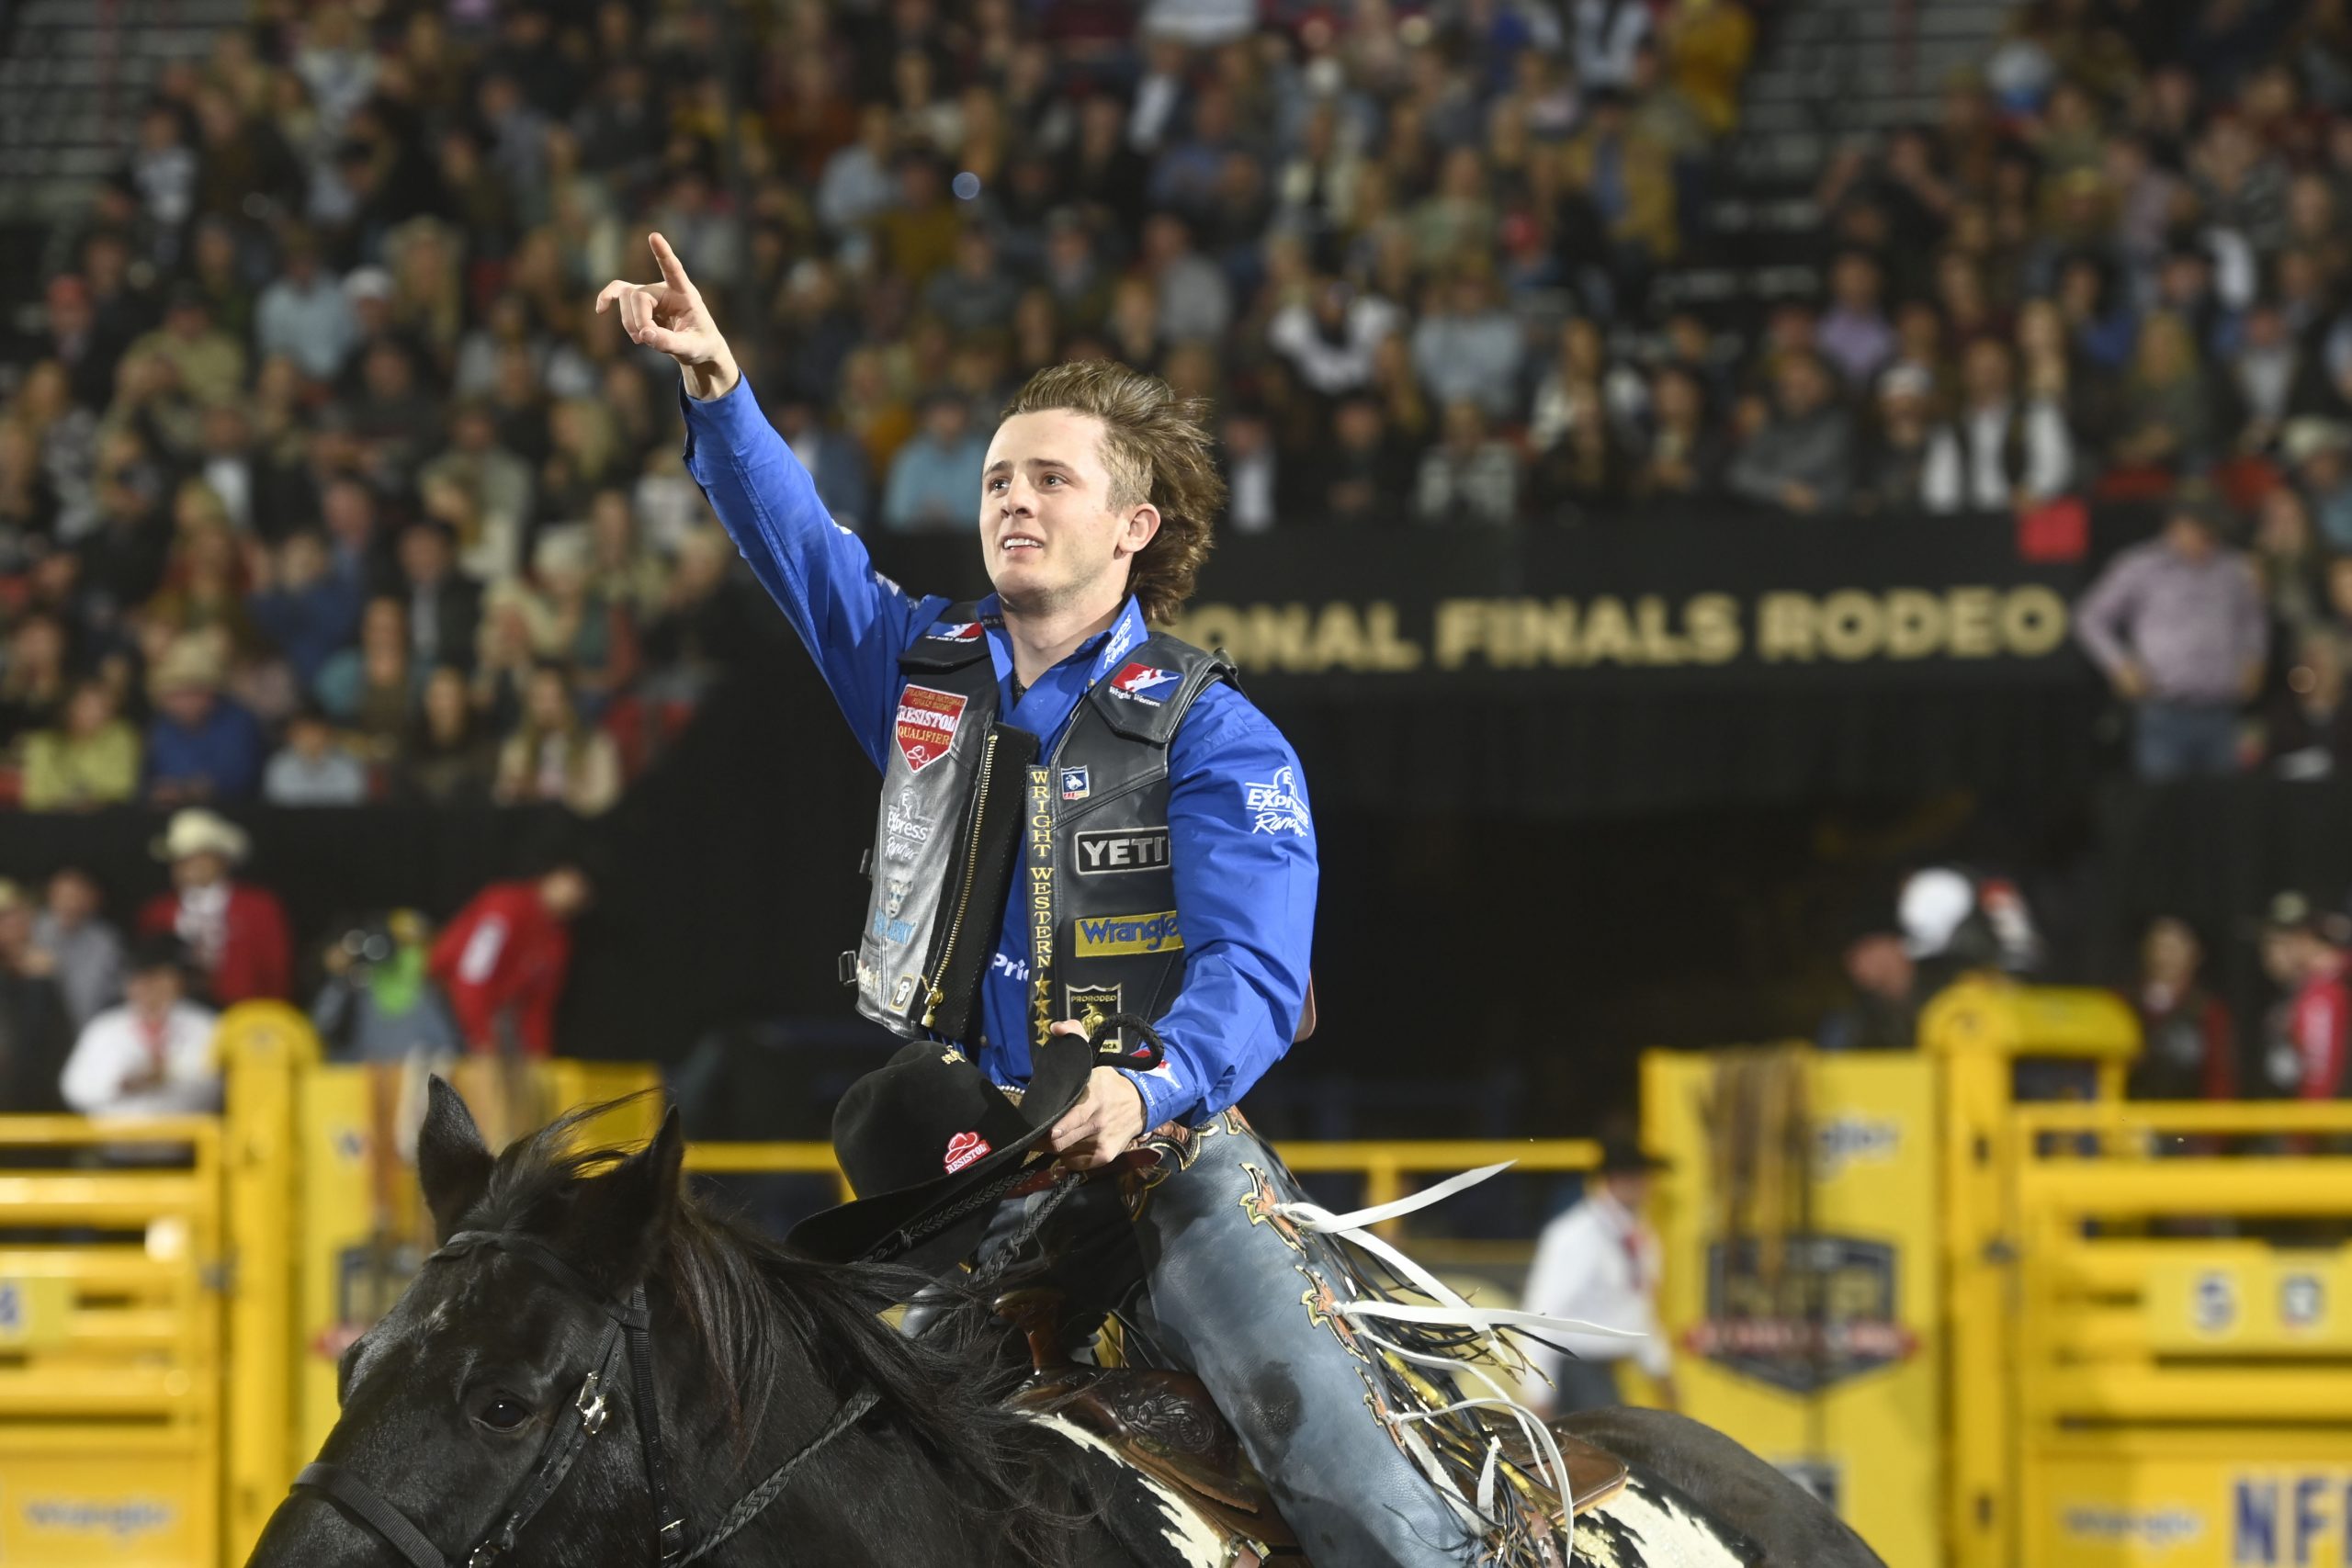 Nfr Round 4 Results : Bulls and Broncs dominate at the NFR.